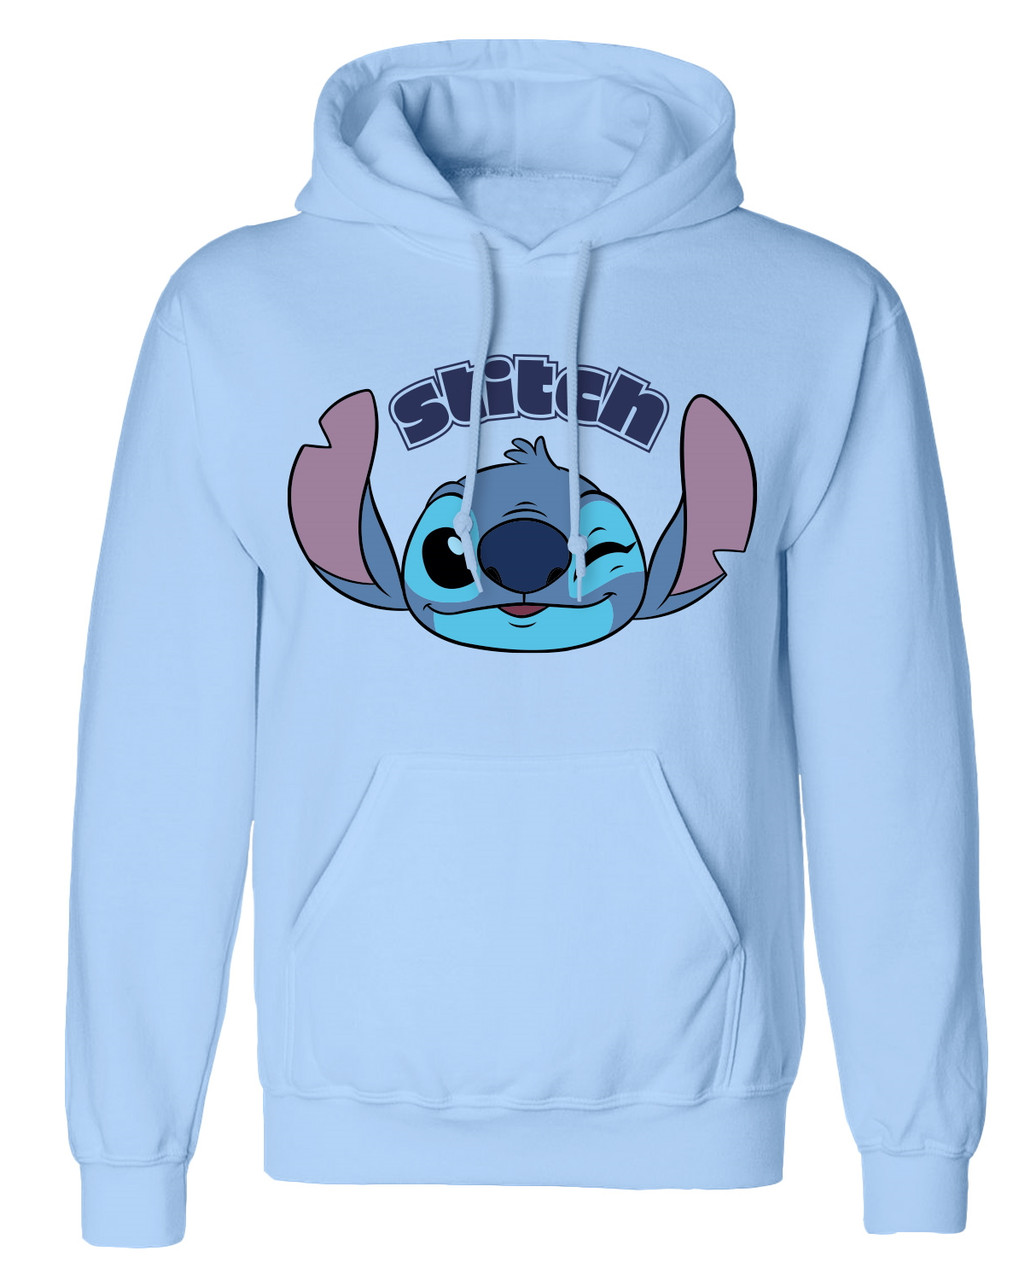 https://cdn11.bigcommerce.com/s-p66uh2e57r/images/stencil/1280x1280/products/34287/46741/Disney_Lilo_Stitch_Cute_Face_Blue_Pull_Over_Hoodie__45118.1678703246.jpg?c=1